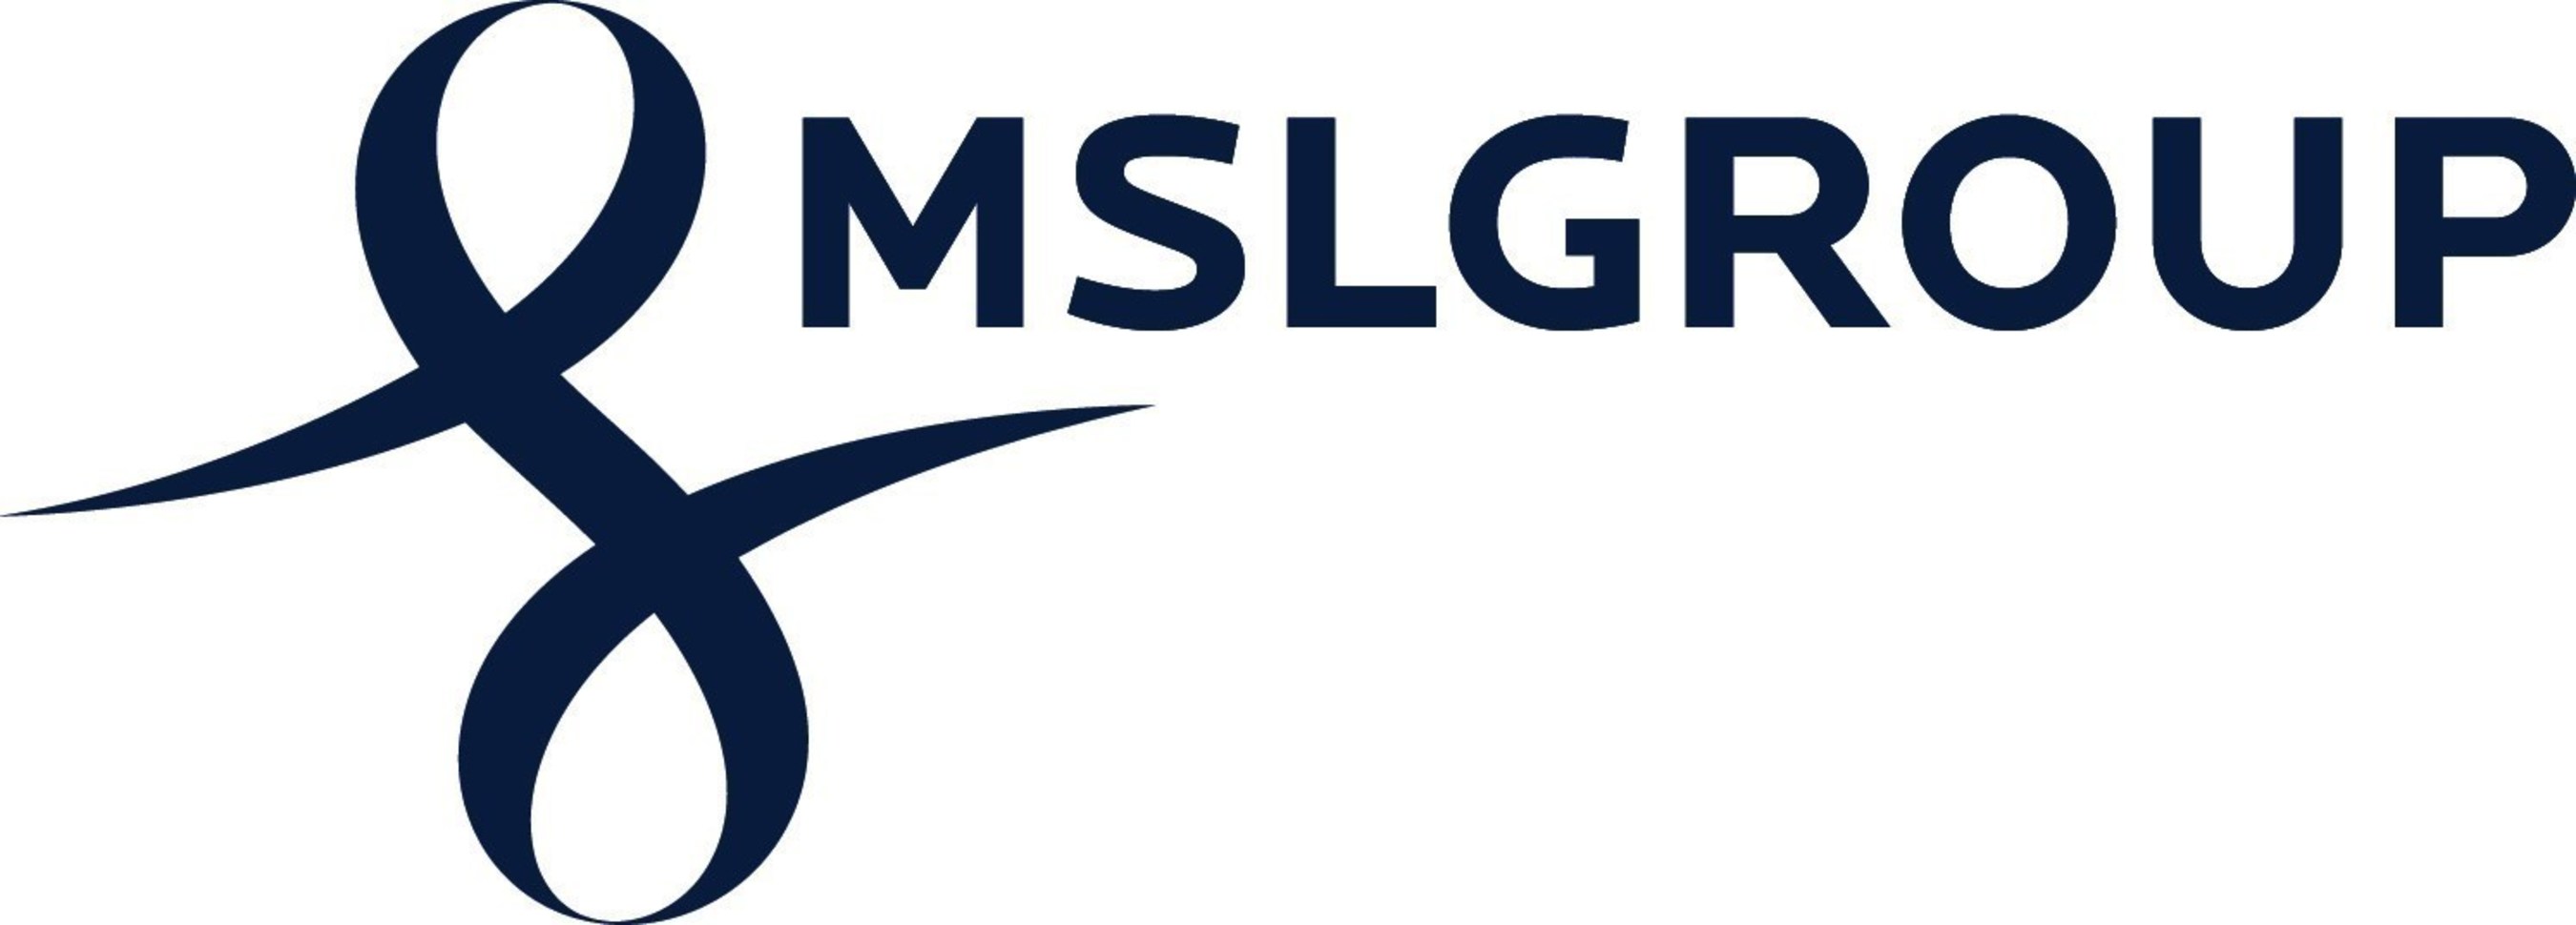 MSLGROUP Launches Fifth Annual Cause Initiative Offering Pro Bono Services To New York Non-Profit